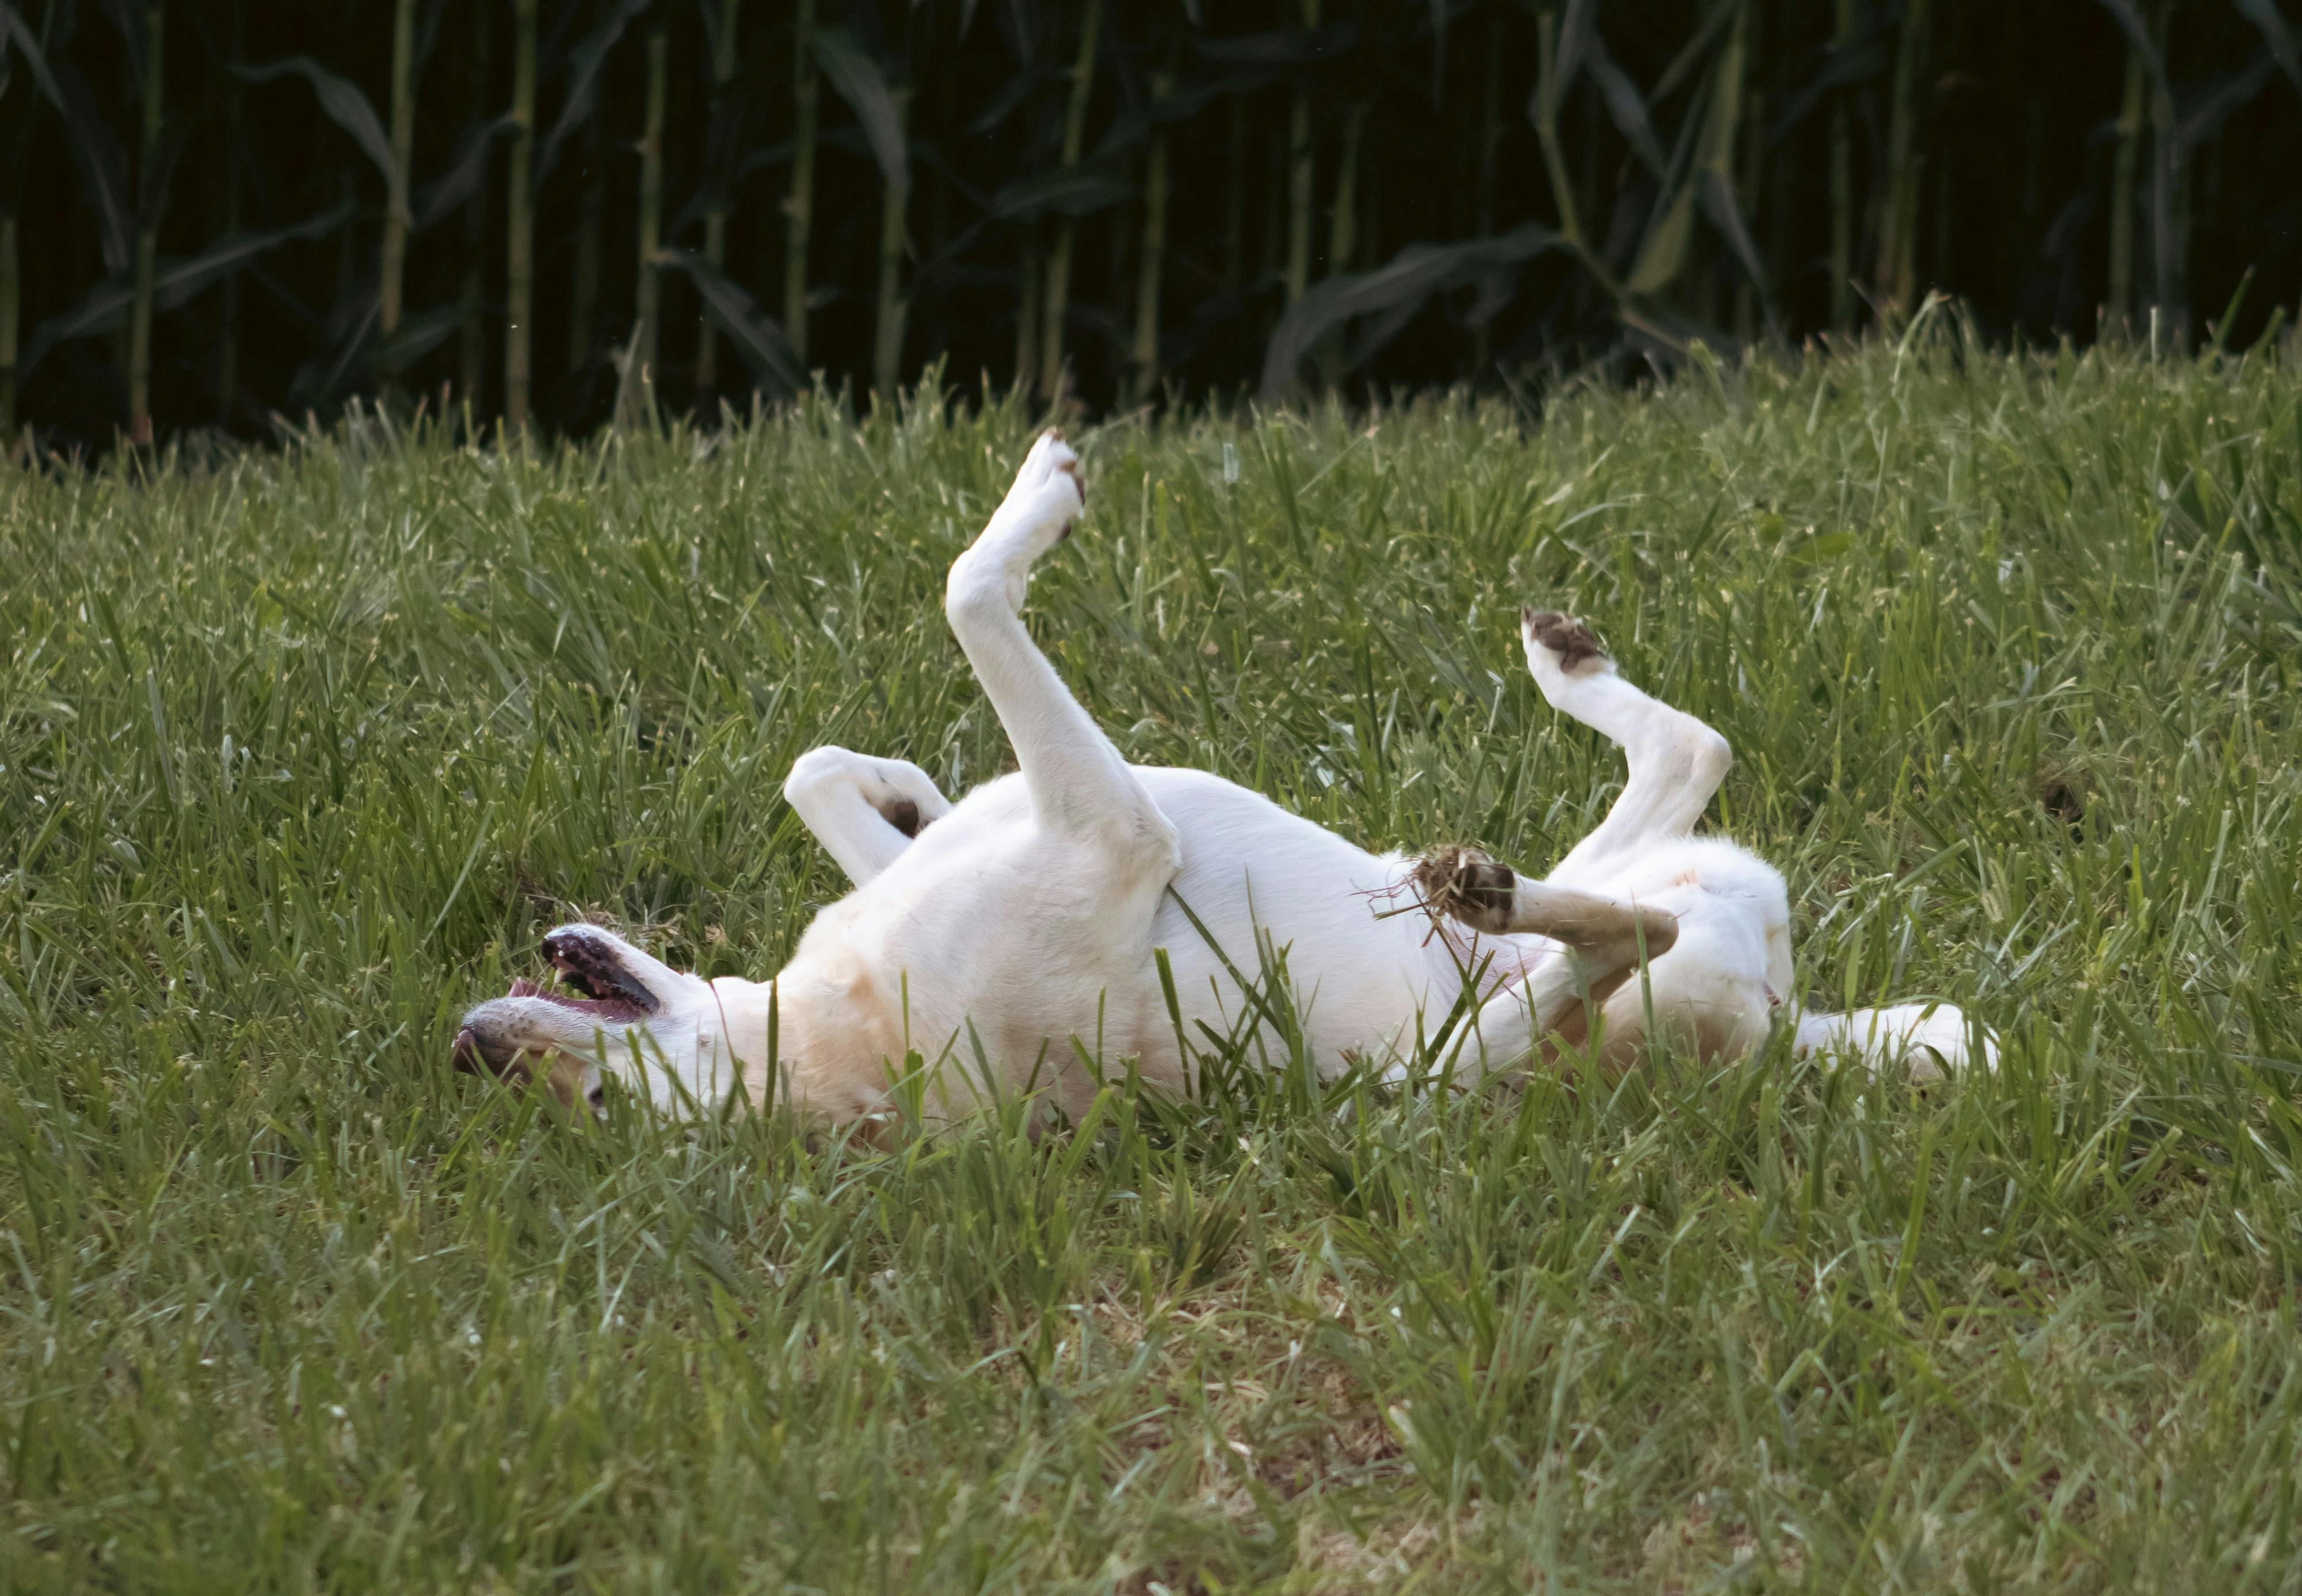 Dog rolling around in the grass.